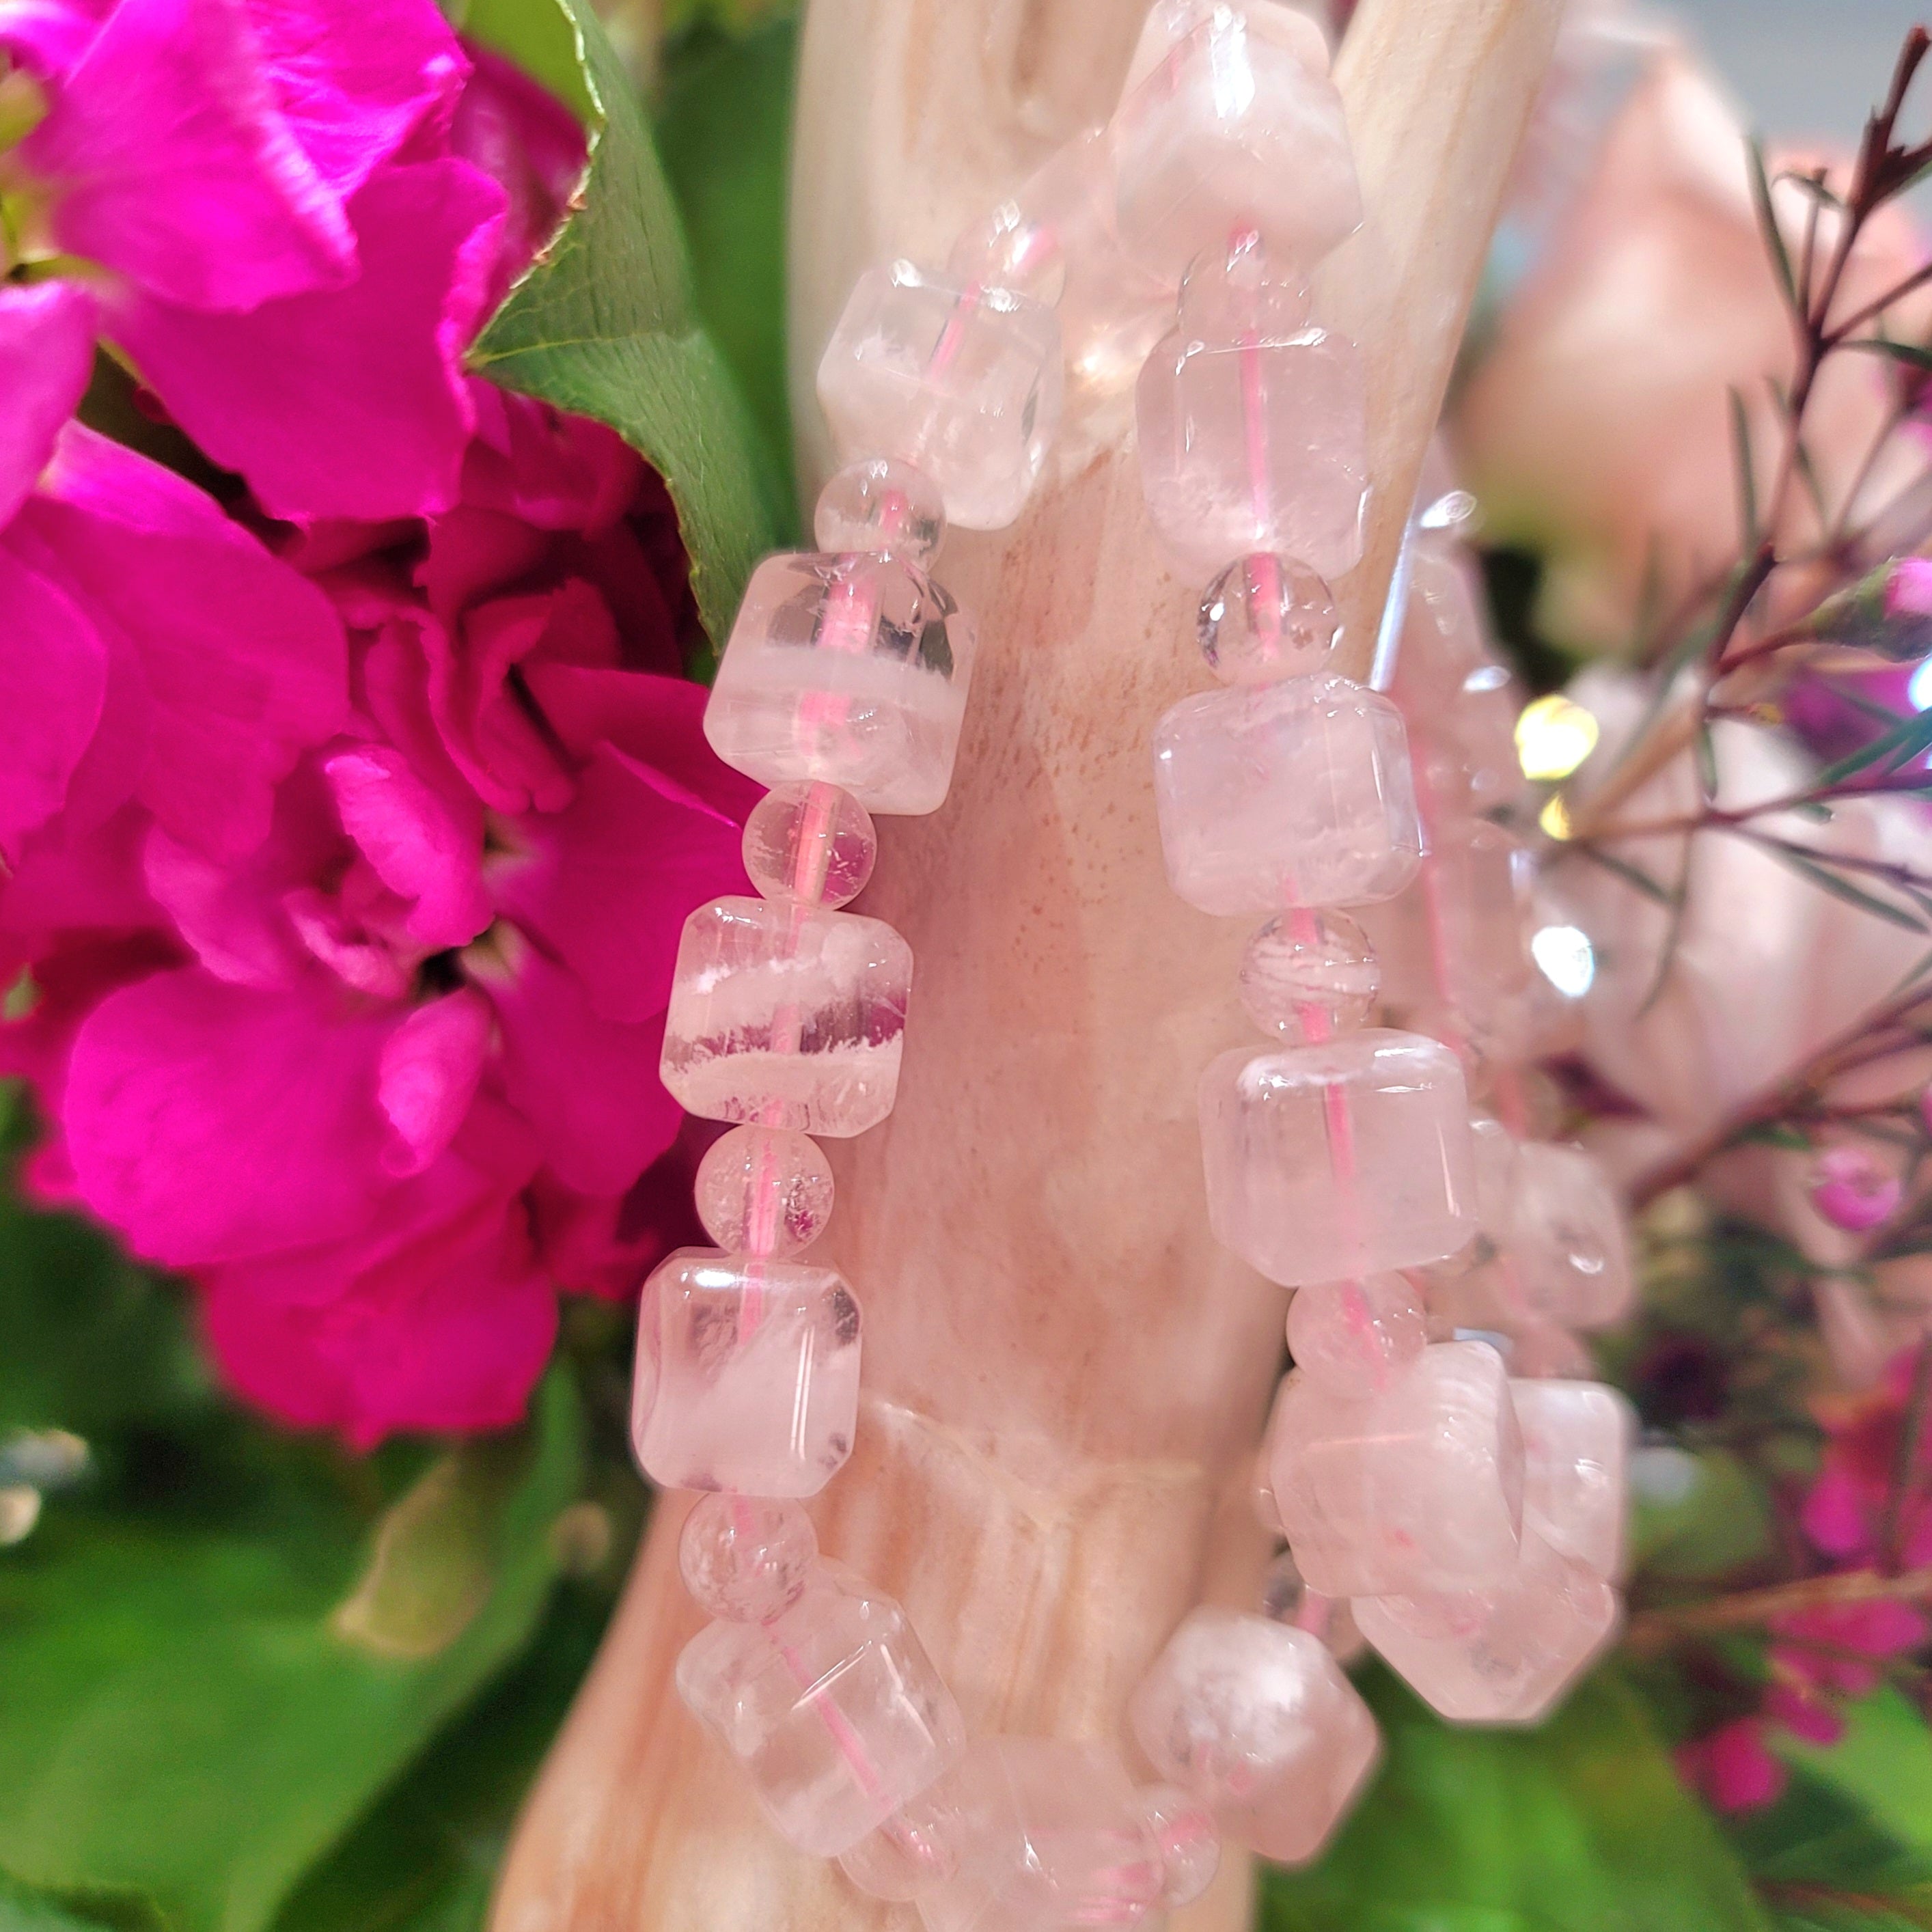 Rose Quartz with White Lodolite Bracelet for Opening Your Heart to Love